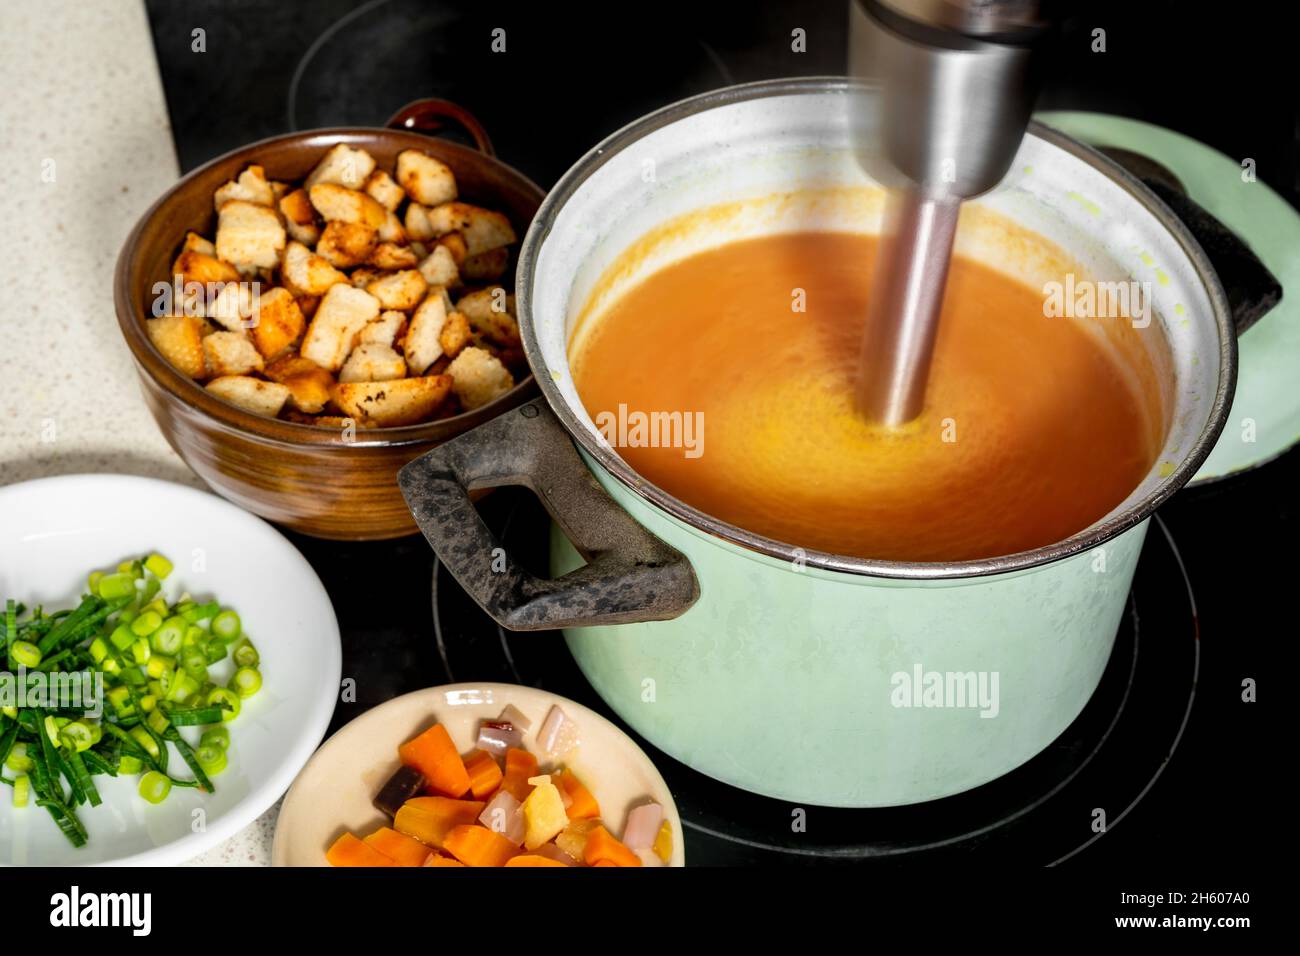 Hand blender in pot on stove mixes carrot soup, plates with vegetable and sliced fried bread on kitchen board. Preparation fresh carrot soup. Stock Photo